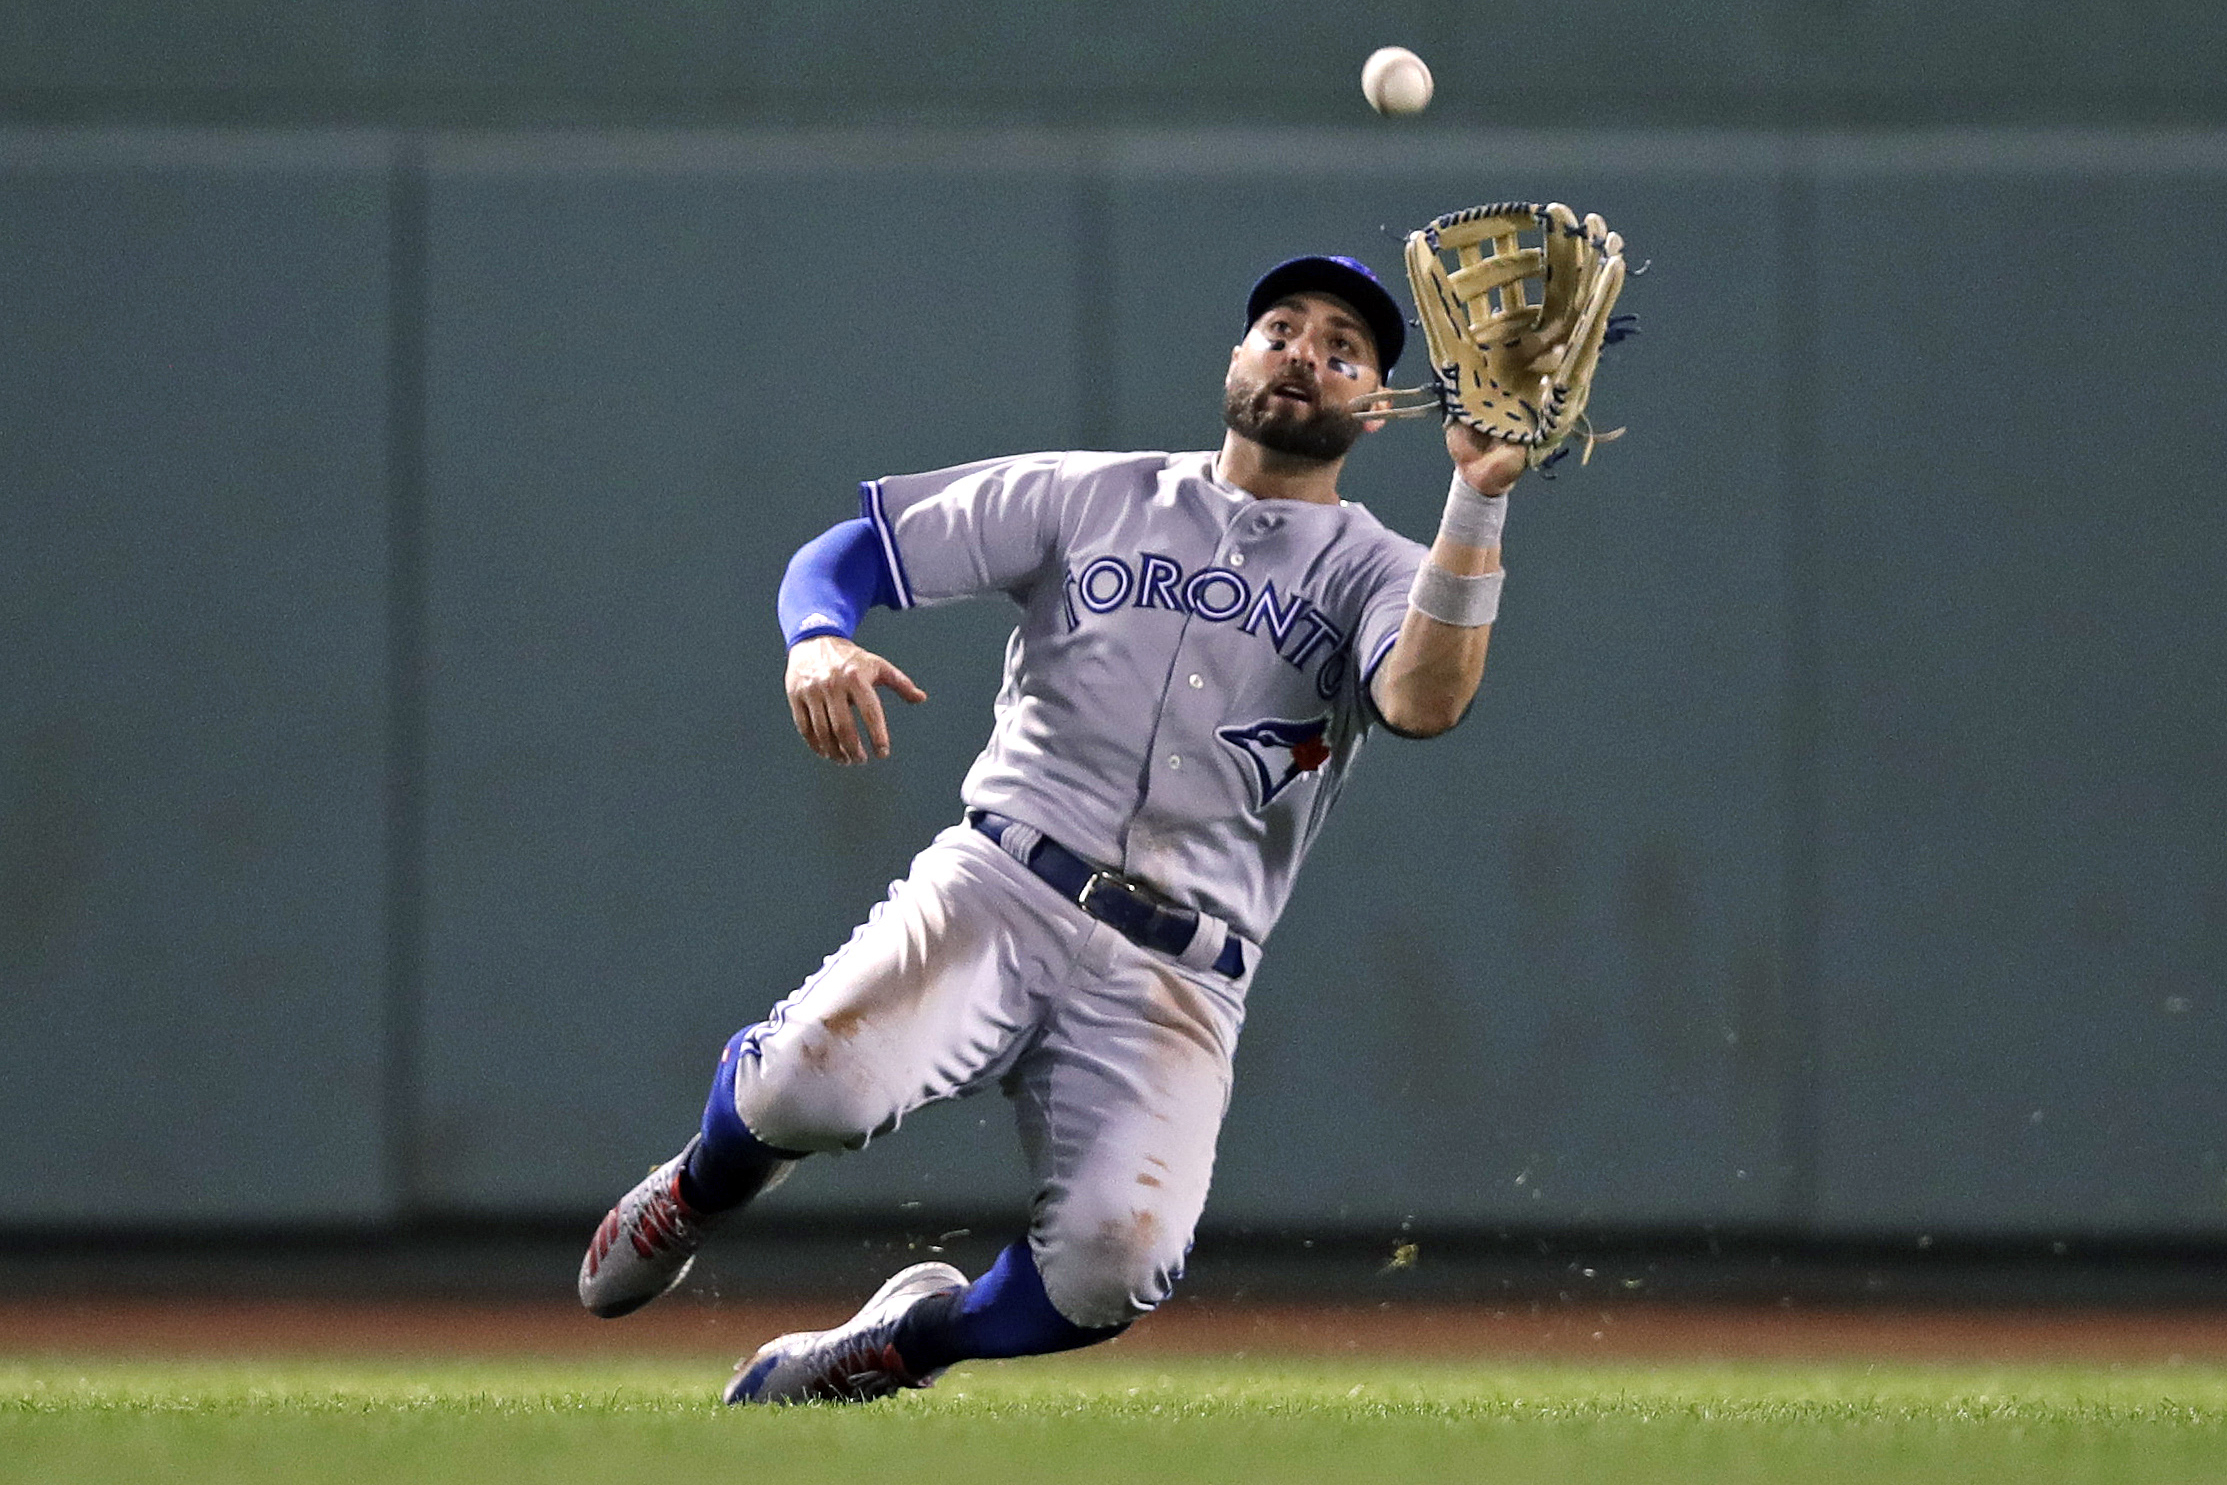 Kevin Pillar Traded to Giants from Blue Jays for Alen Hanson